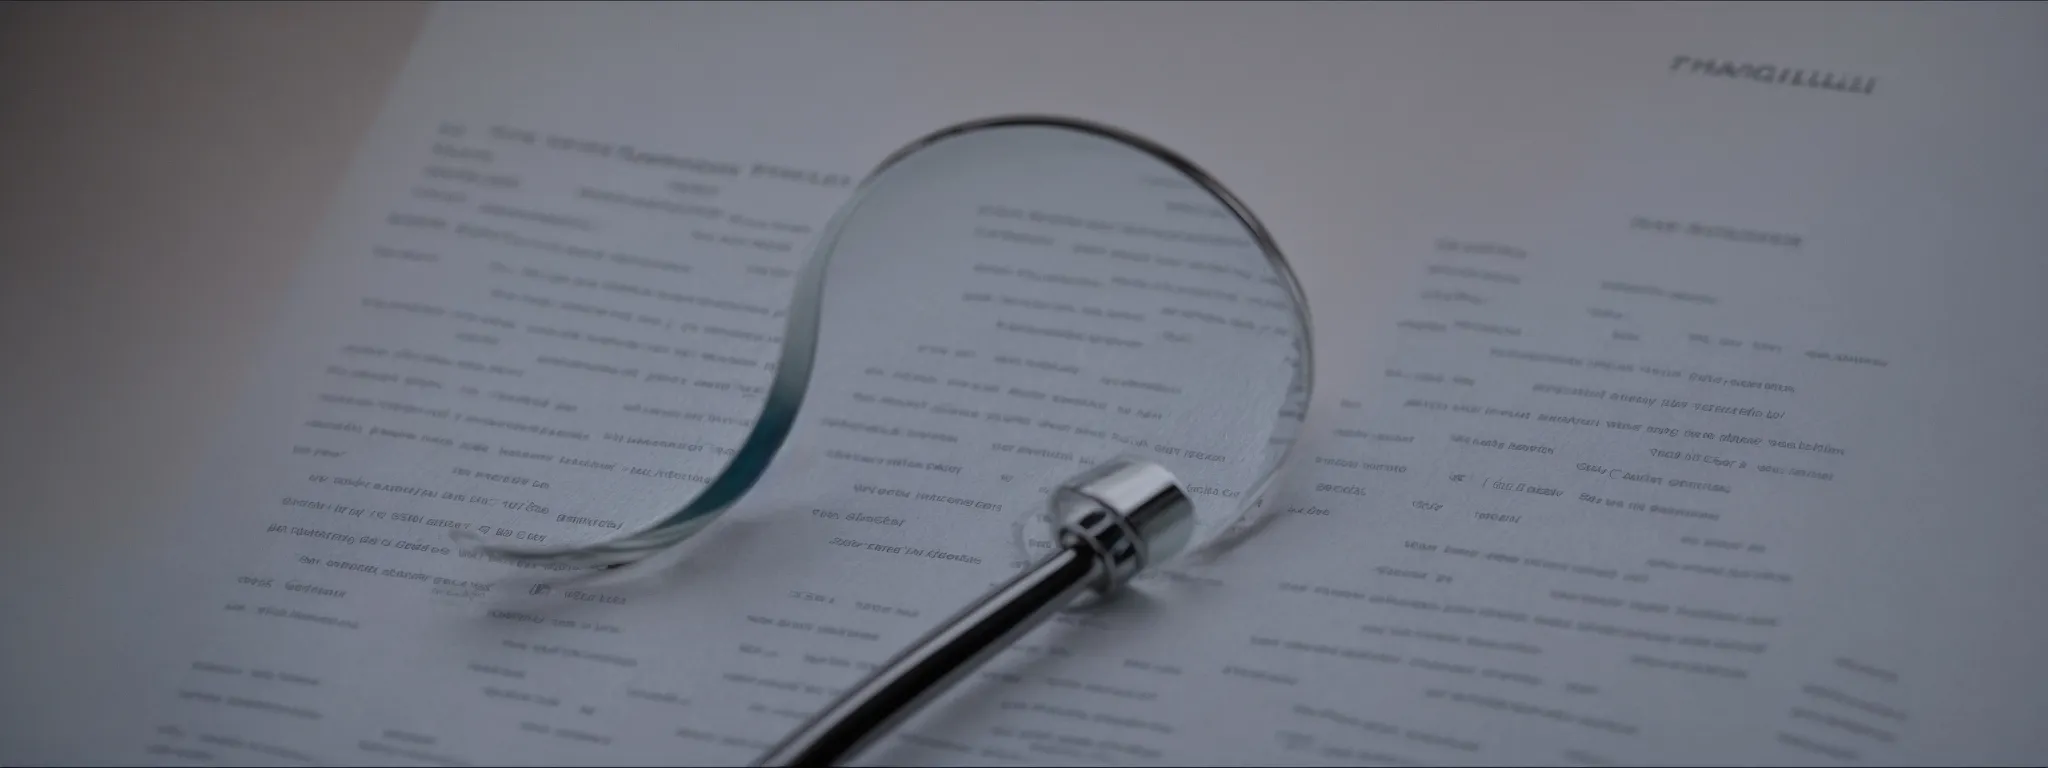 a magnifying glass hovering over a stack of identical looking papers on a desk.